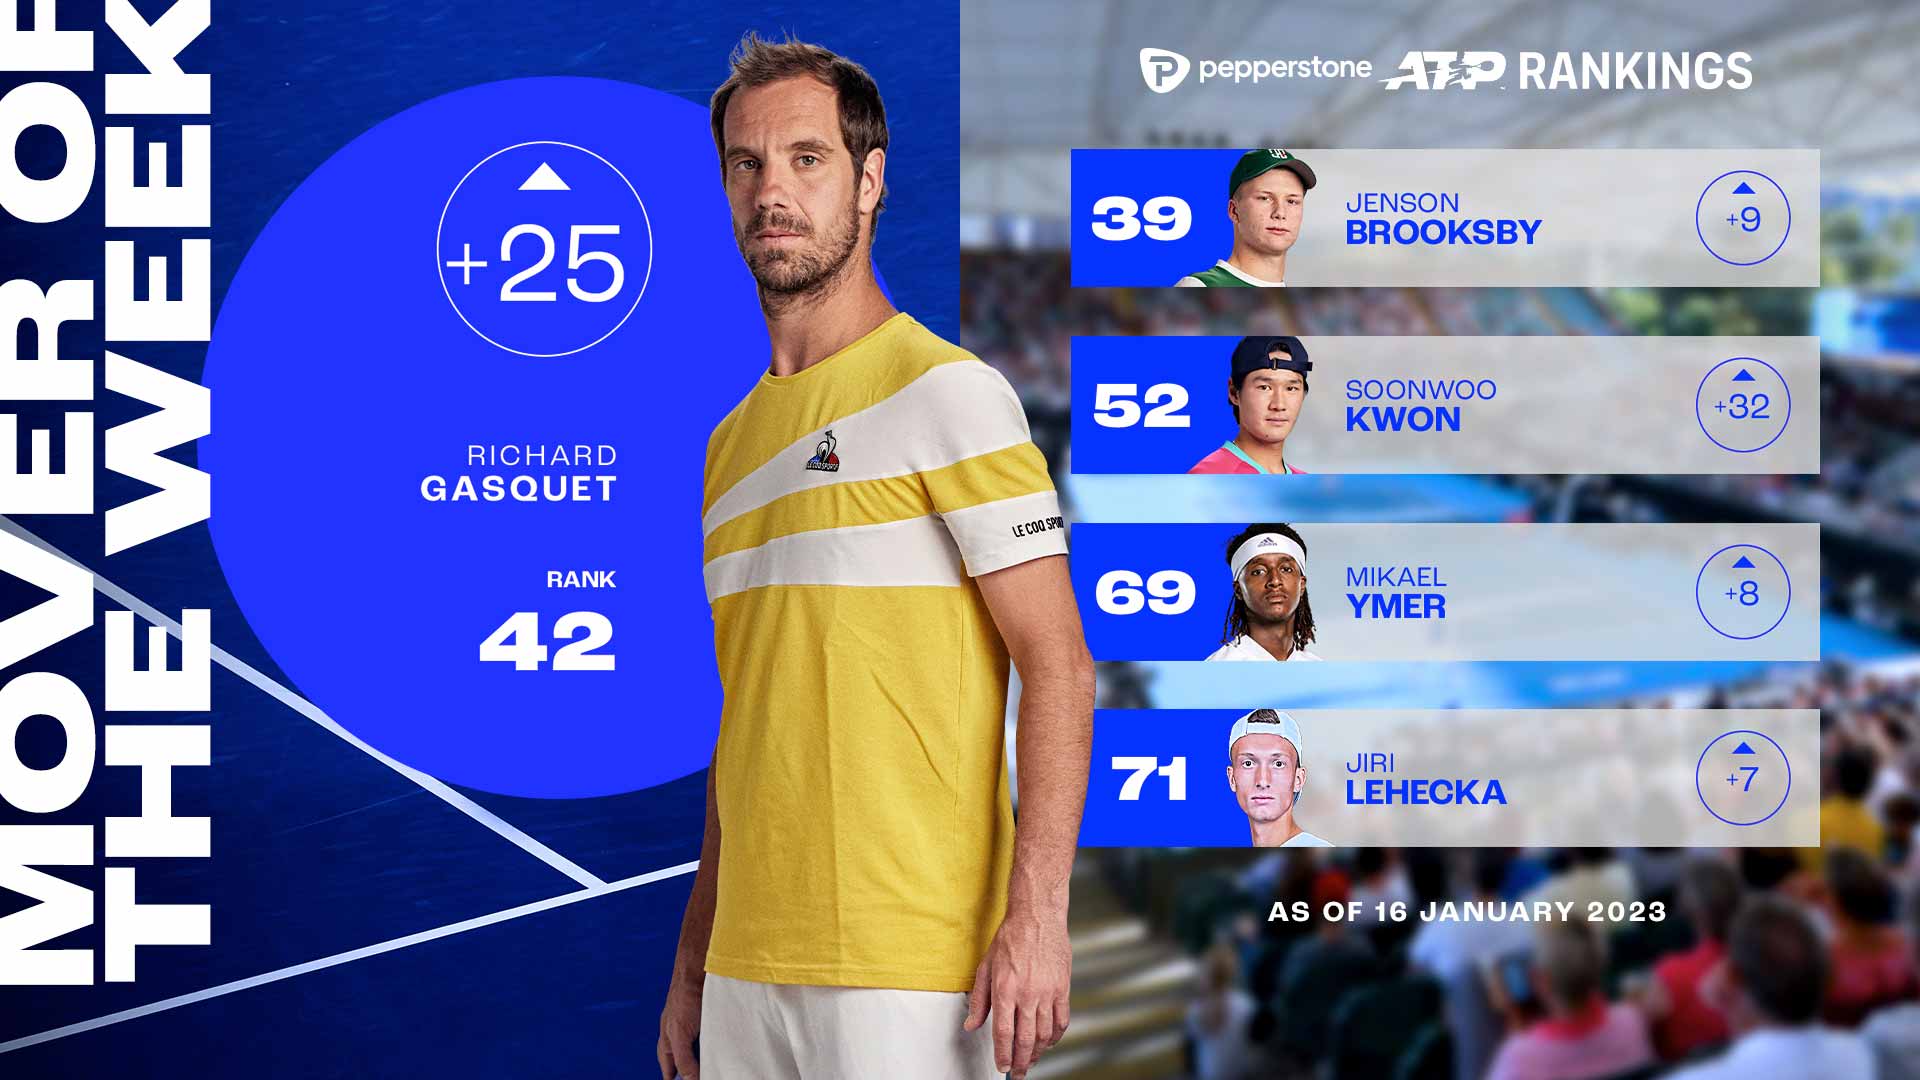 Richard Gasquet captured his 16th tour-level title in Auckland.